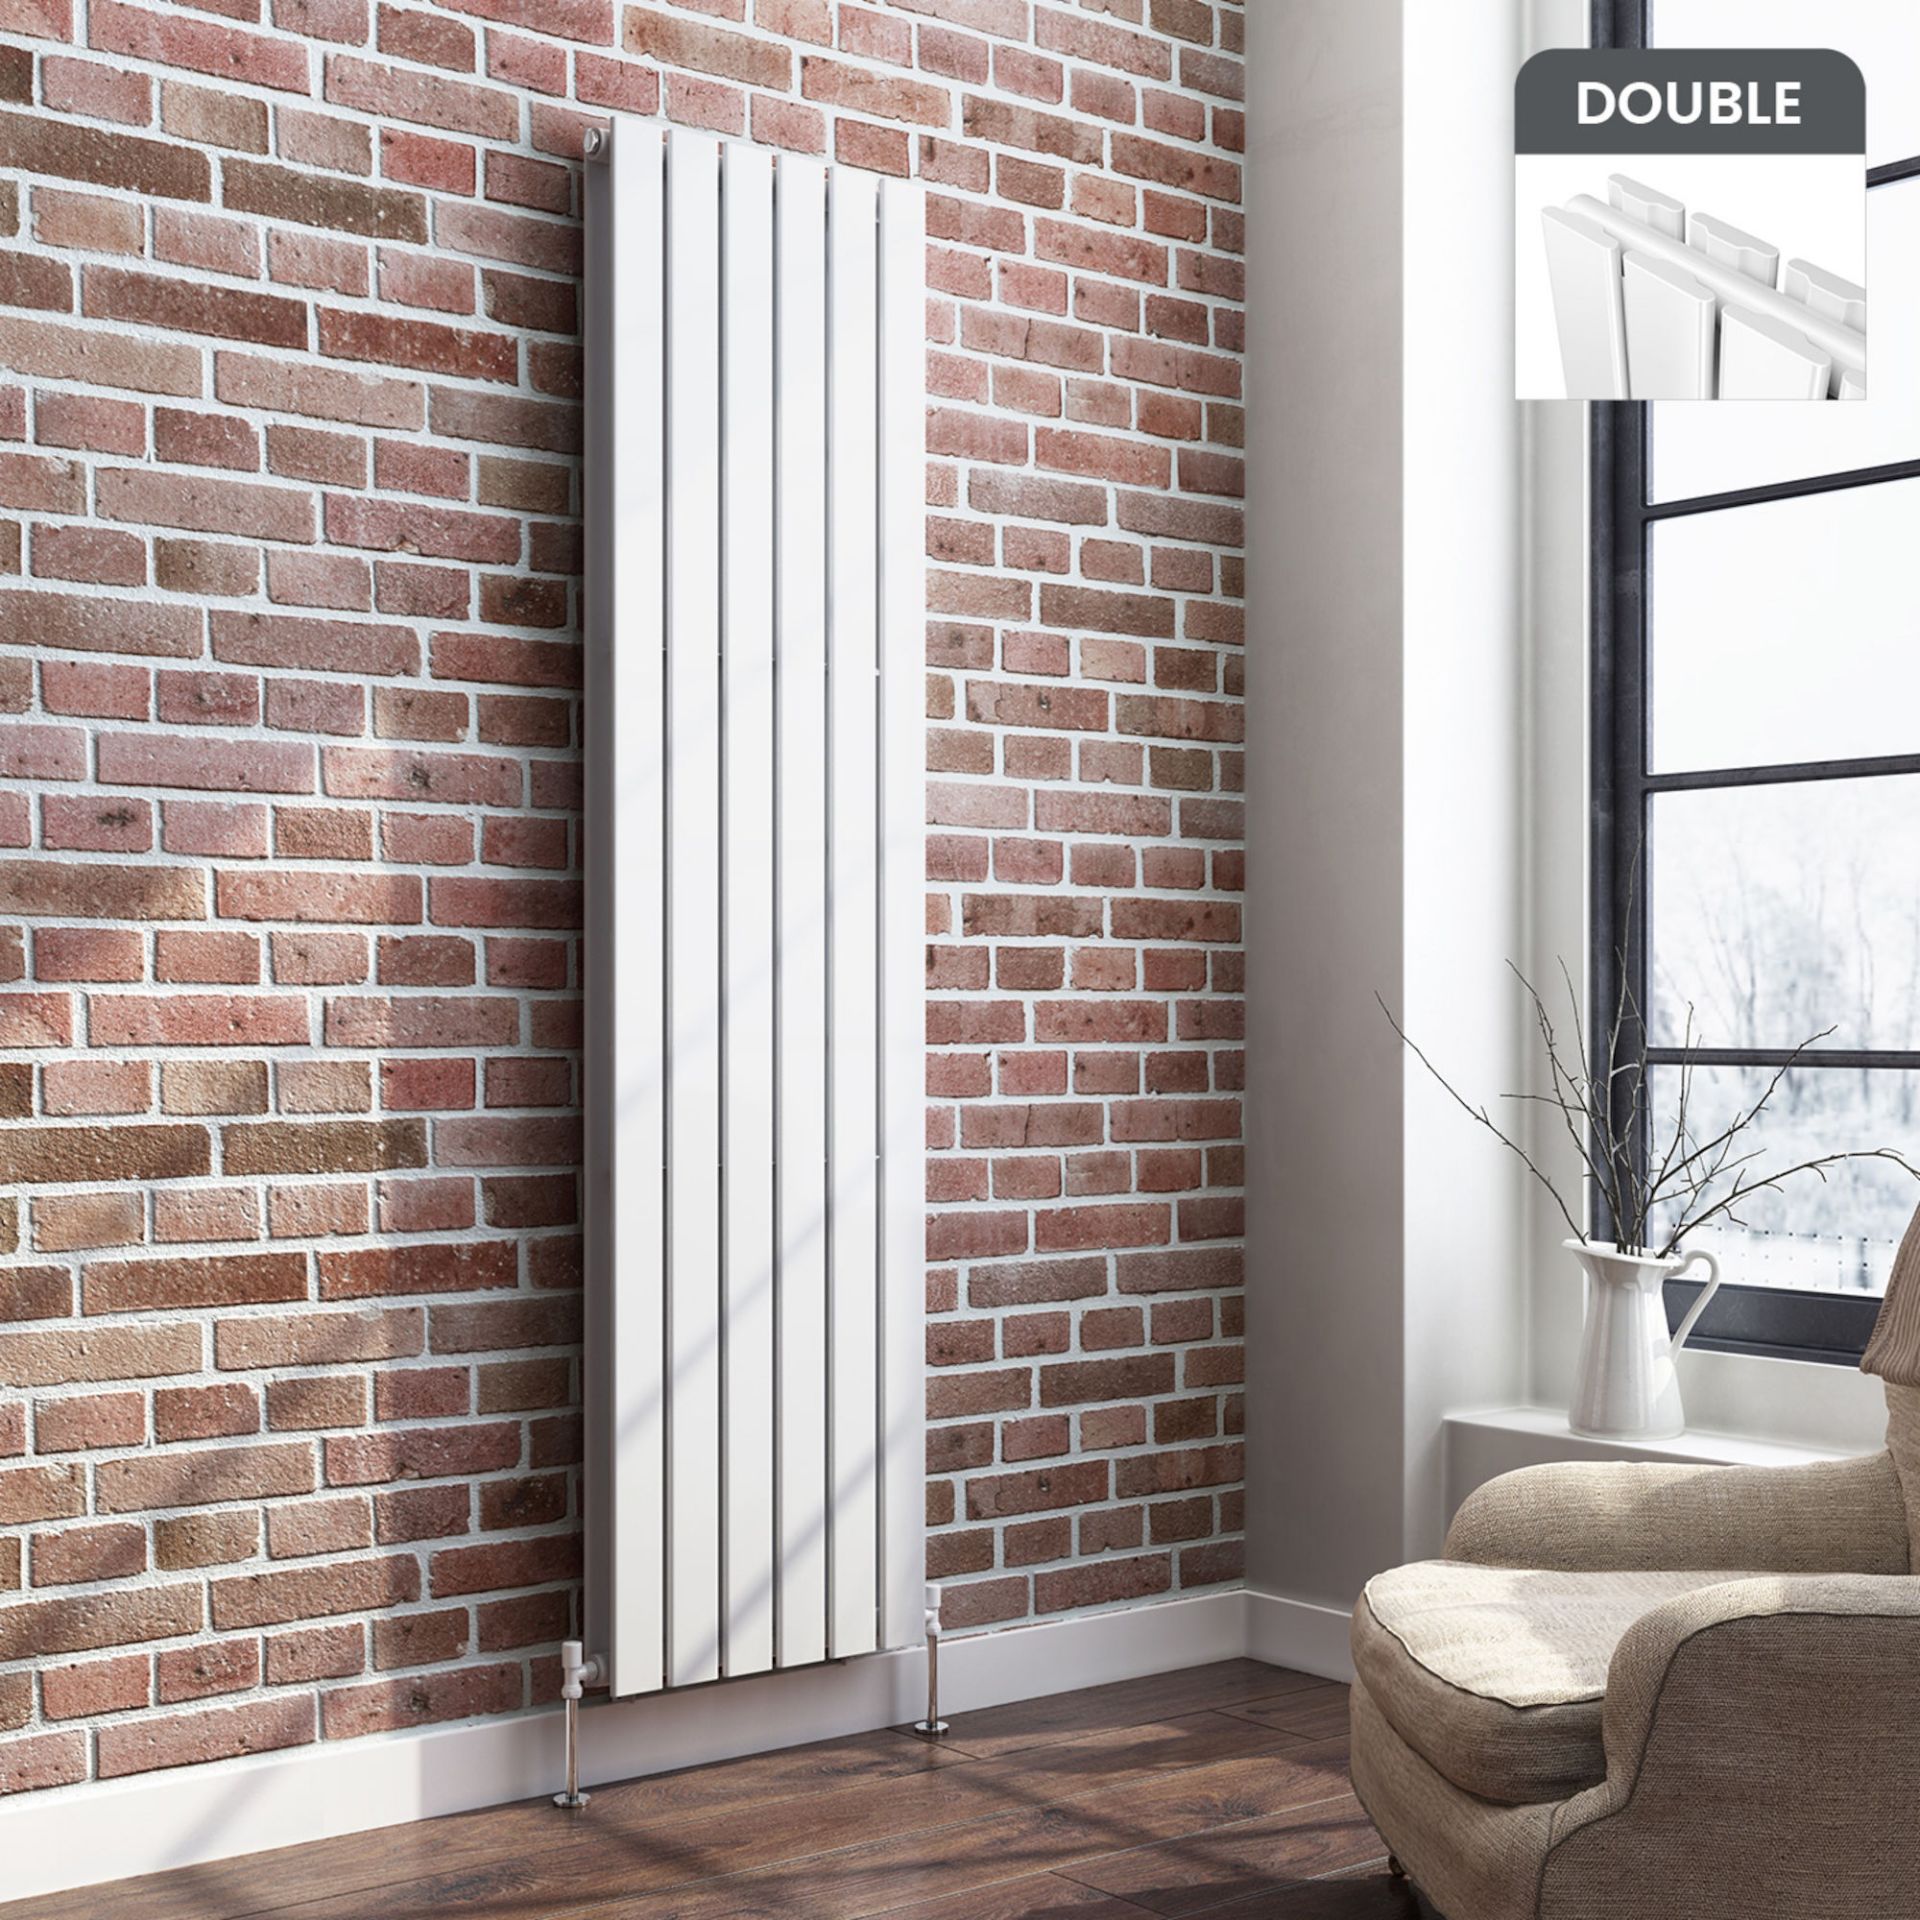 (OS266) 1800x452mm Gloss White Double Flat Panel Vertical Radiator. RRP £499.99. We love this